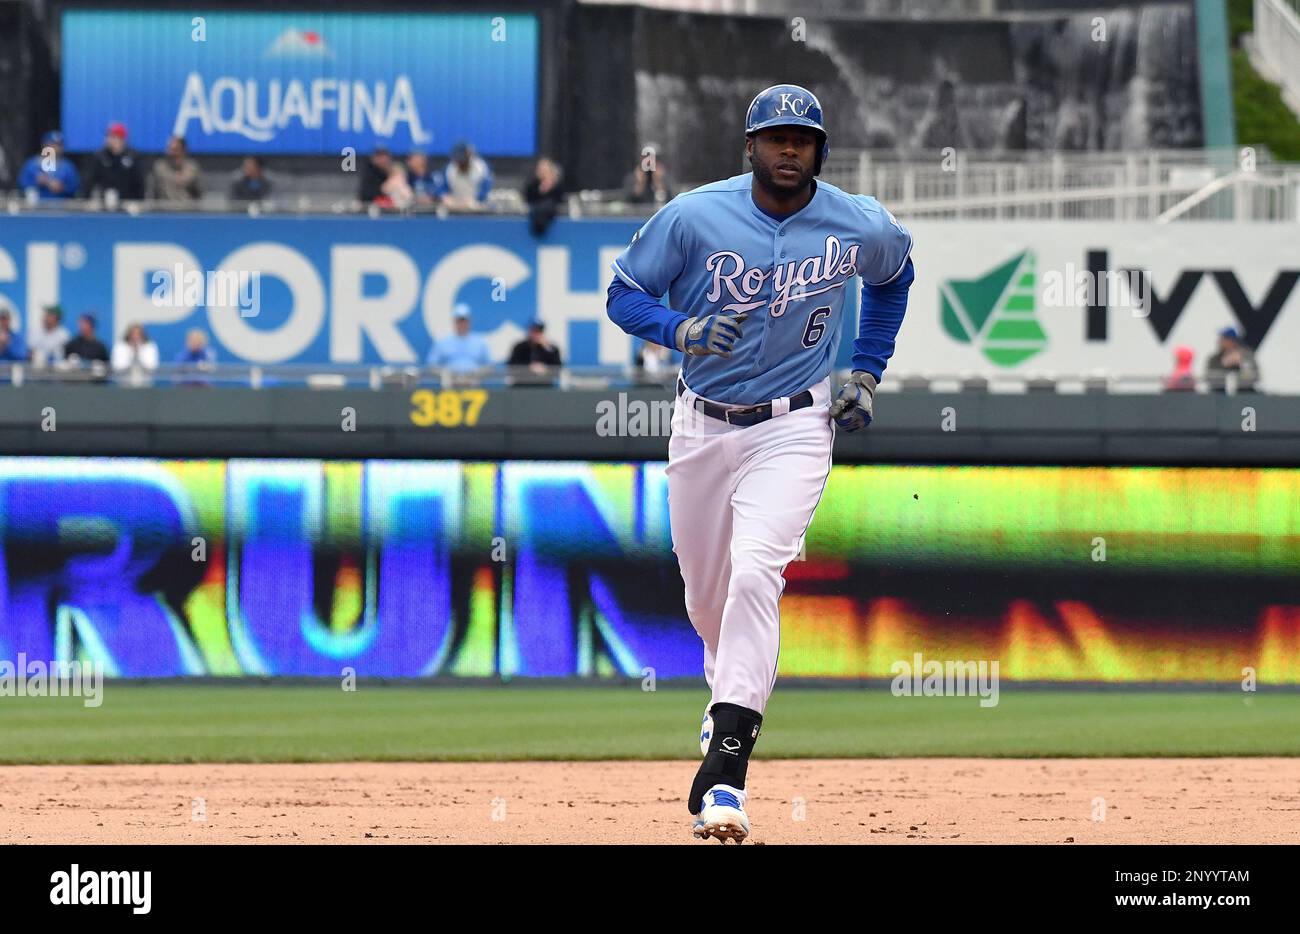 KANSAS CITY, MO. - APRIL 30: Kansas City Royals center fielder Lorenzo Cain (6) runs the bases in the fifth inning after hitting a solo home run during a MLB game between the Minnesota Twins and the Kansas City Royals on April 30, 2017, at Kauffman Stadium in Kansas City, MO. (Photo by Keith Gillett/Icon Sportswire) (Icon Sportswire via AP Images) Stock Photo